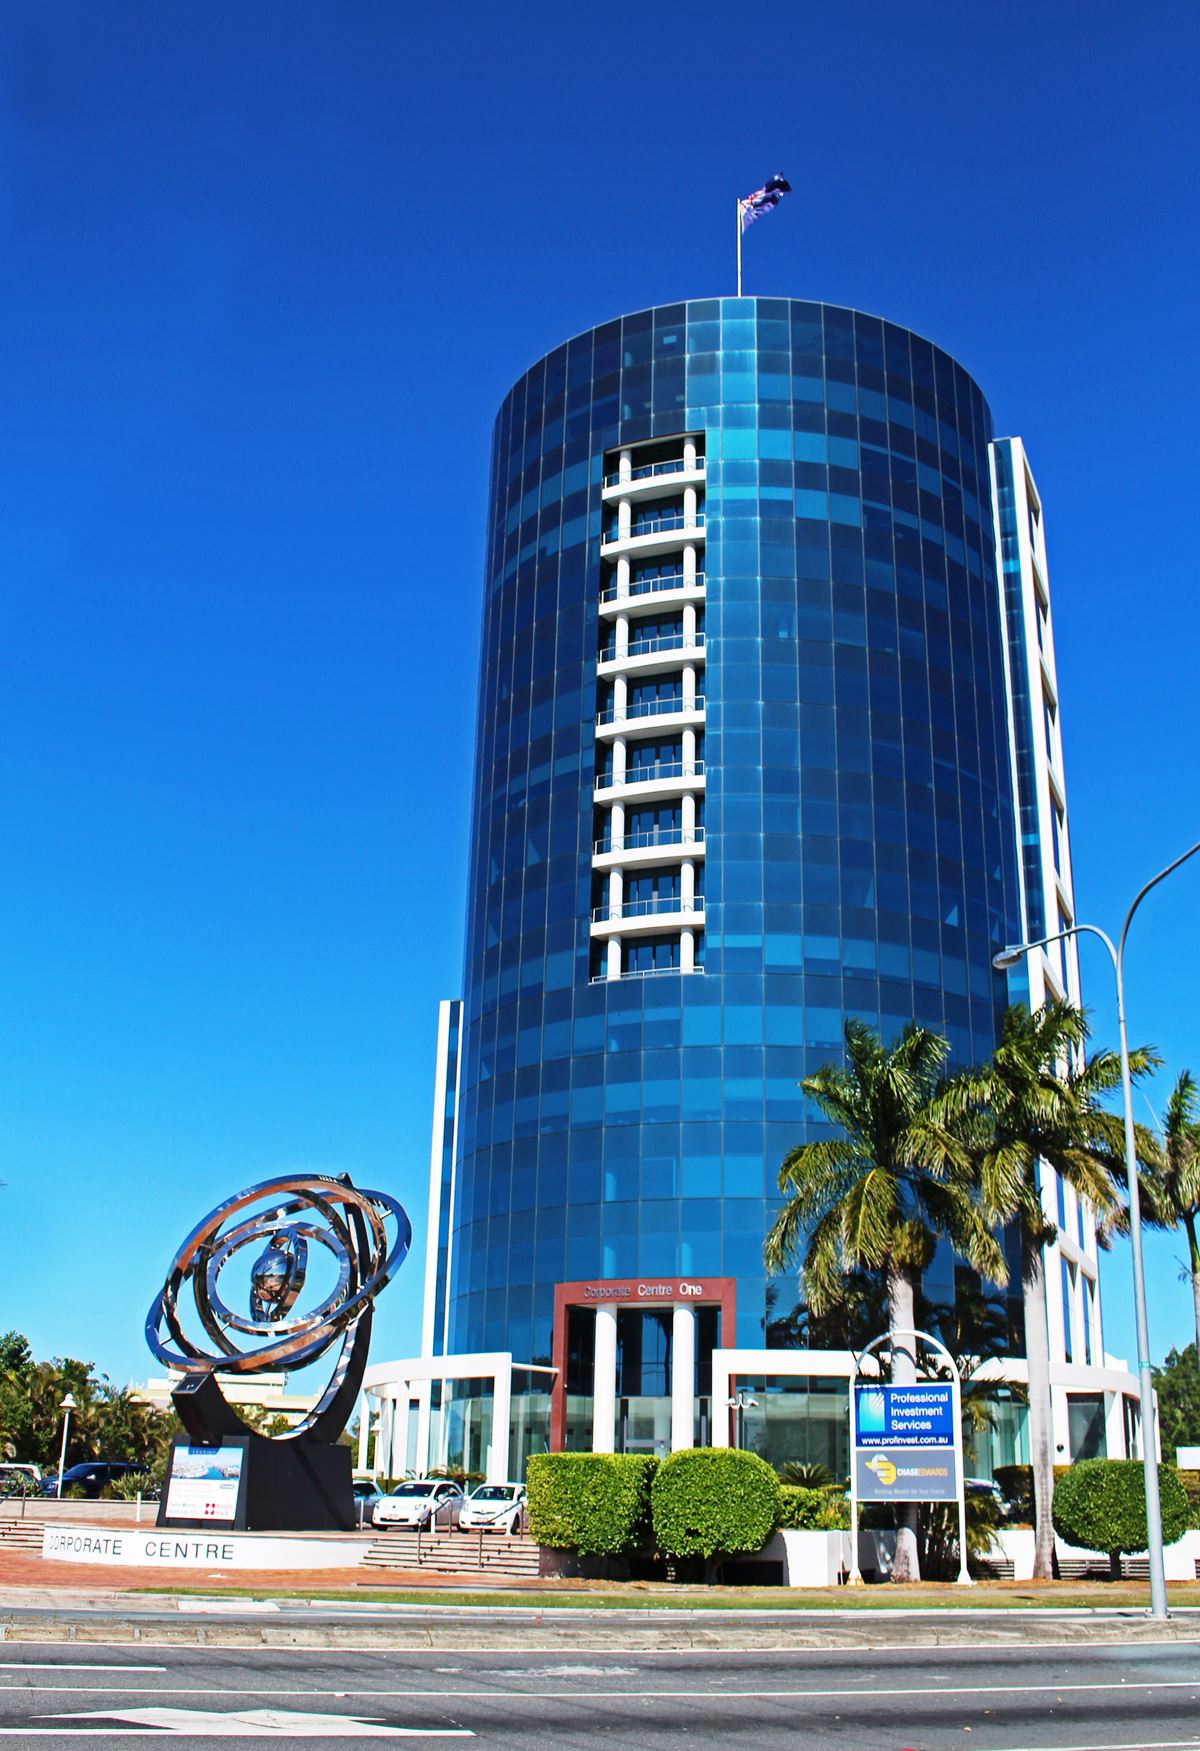 7,8,9,11,18 and 23/9 TRICKETT STREET, Surfers Paradise QLD 4217 - Office  For Lease